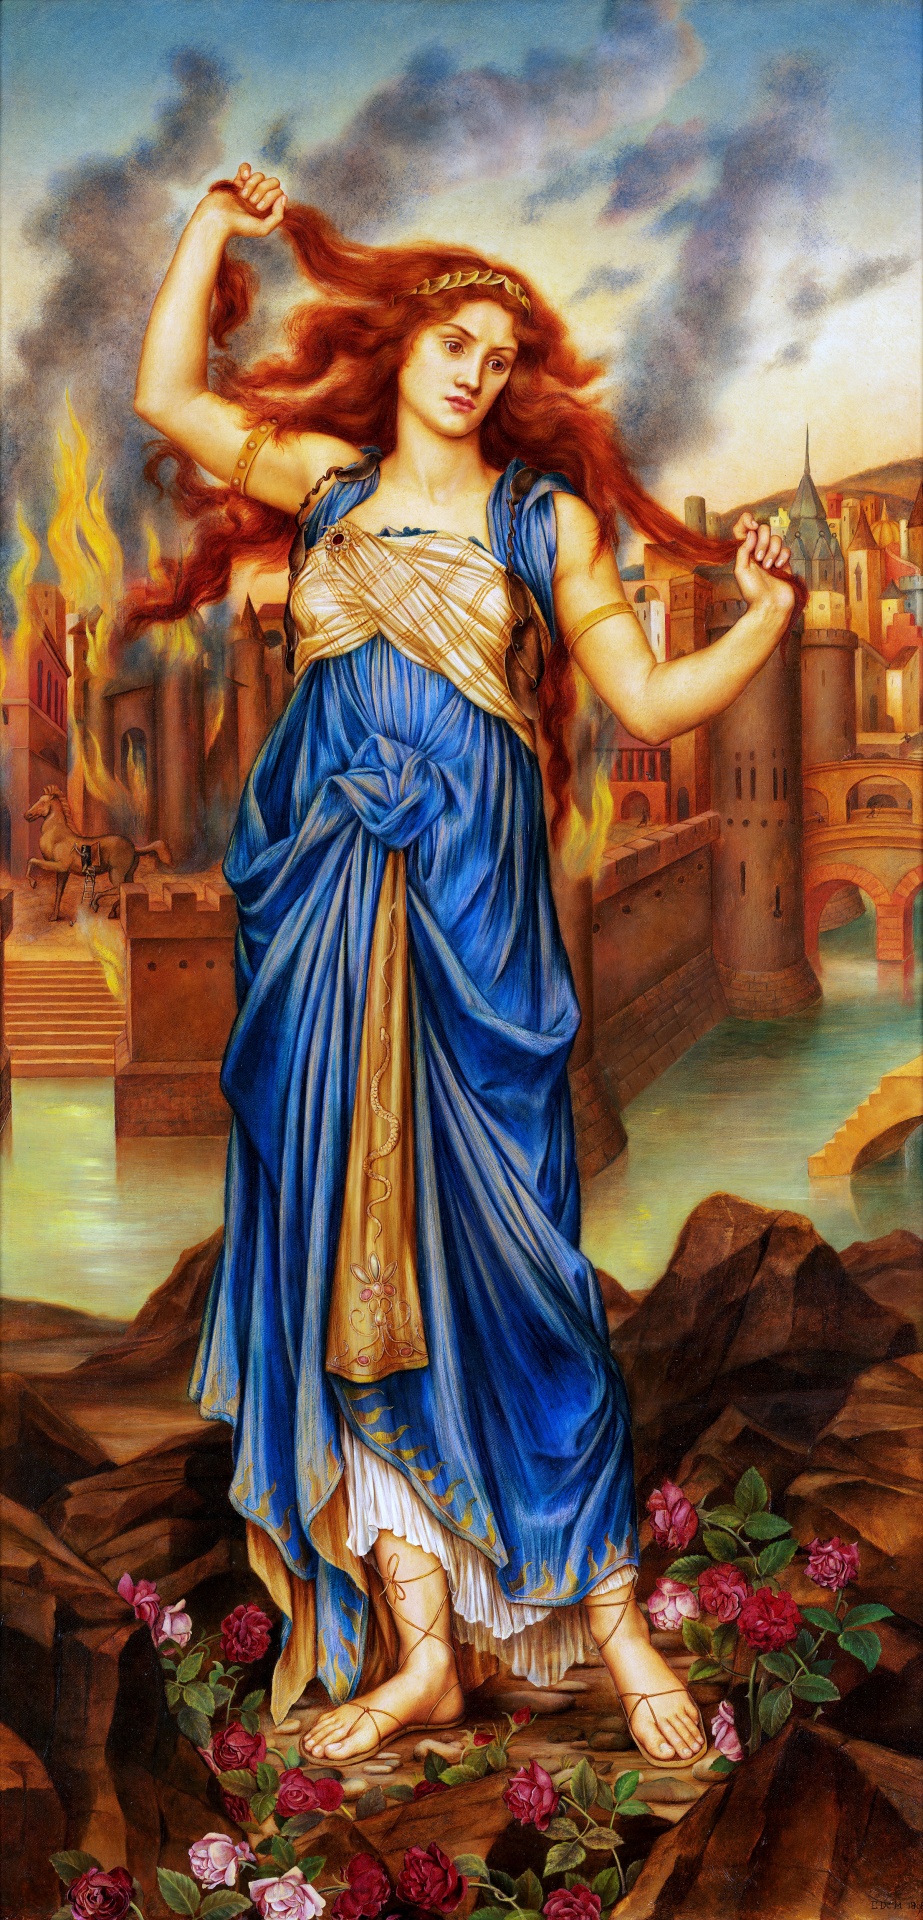 Vintage art painting by artist Evelyn de Morgan entitled Cassandra who in greek legend was loved by apollo but she rejected him